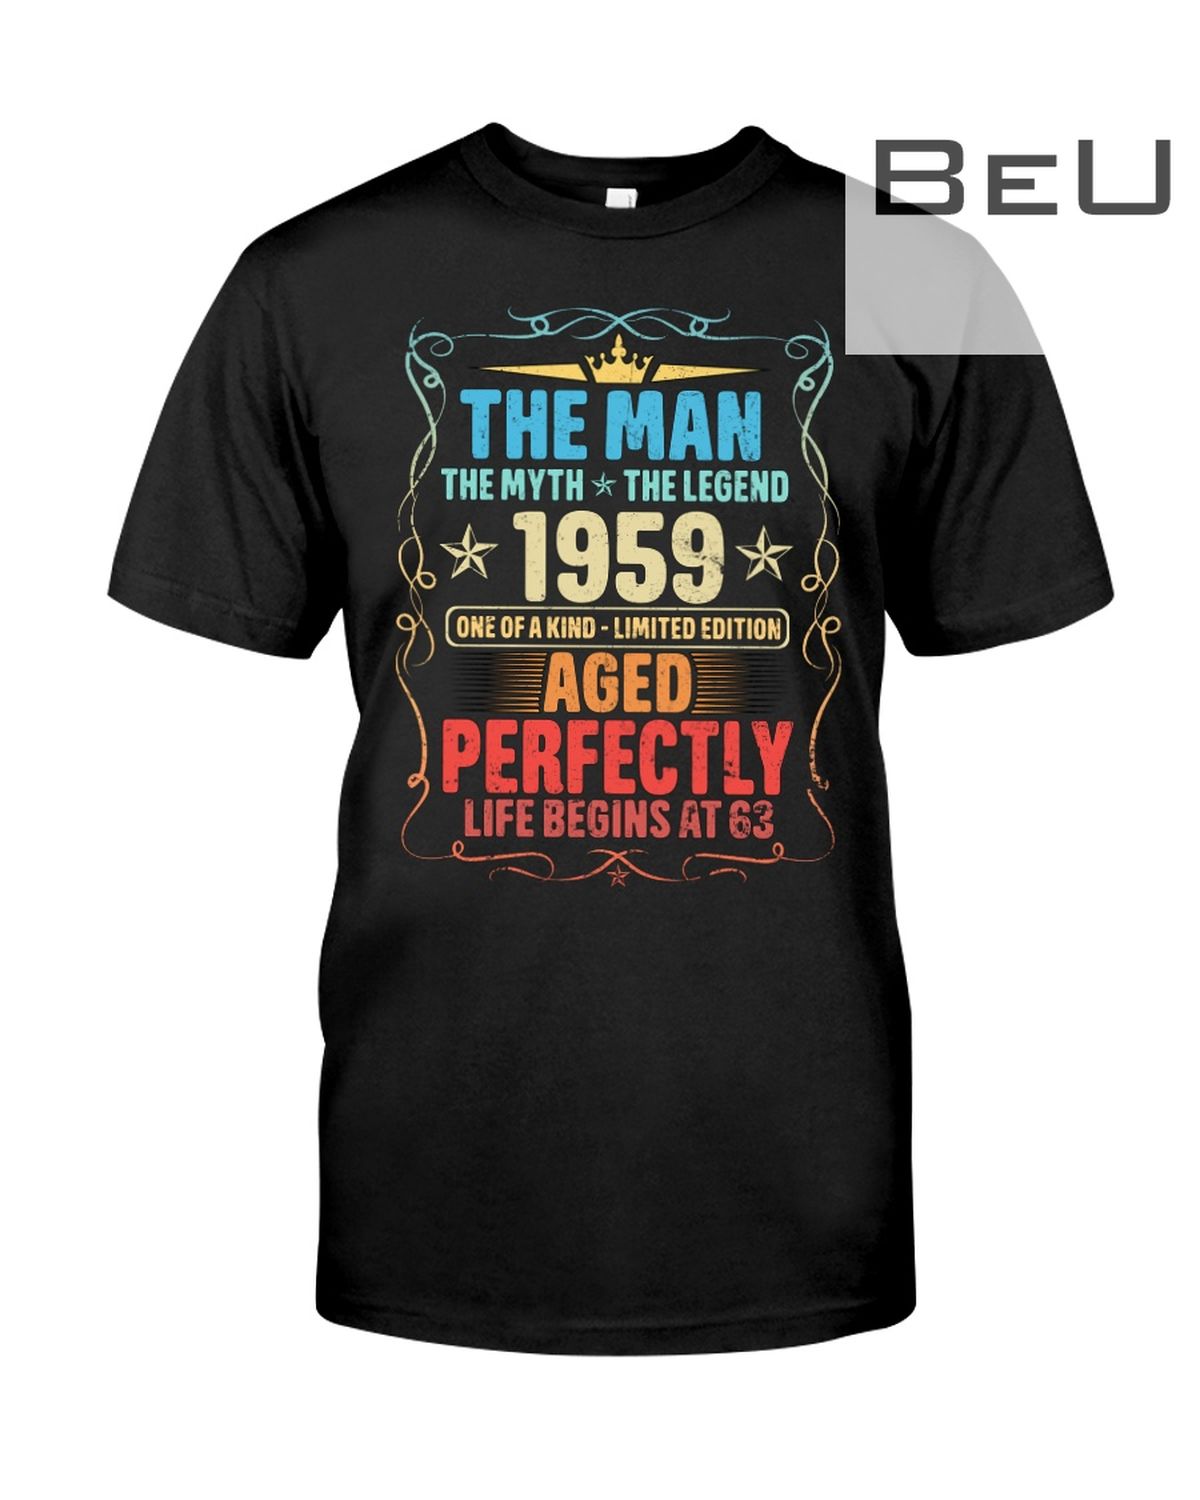 The Man The Myth The Legend 1959 One Of A Kind - Limited Edition Aged Perfectly Shirt